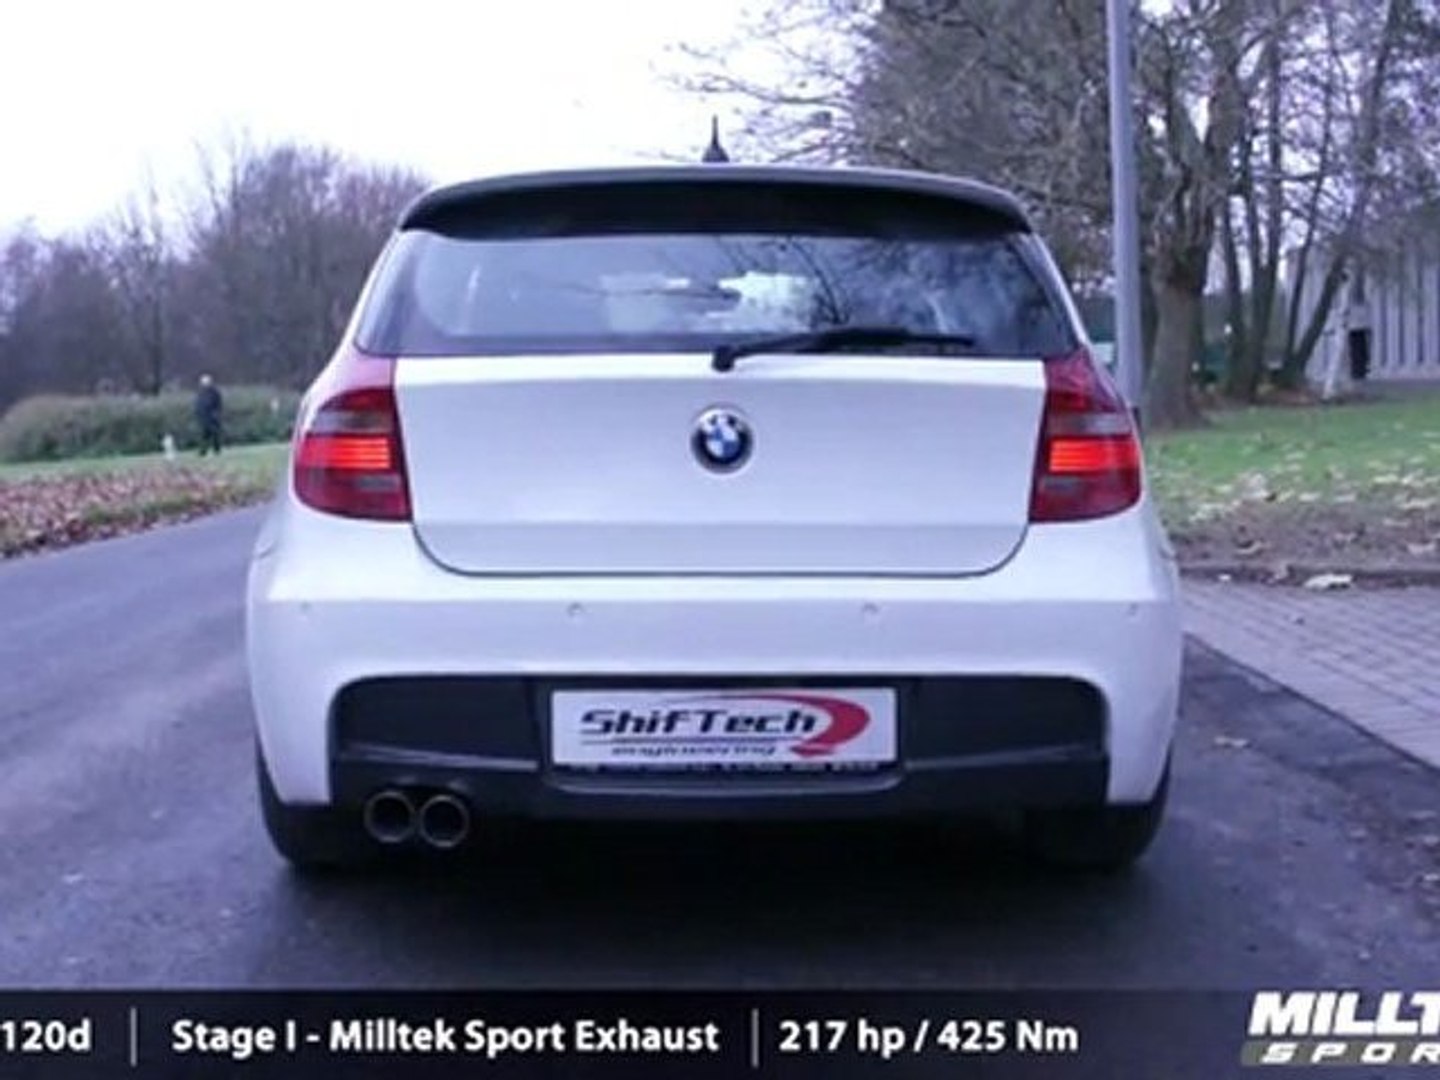 ShifTech Engineering - BMW Series 120d - 217hp | 425Nm - stage I - [  Milltek sound only ] - Vidéo Dailymotion